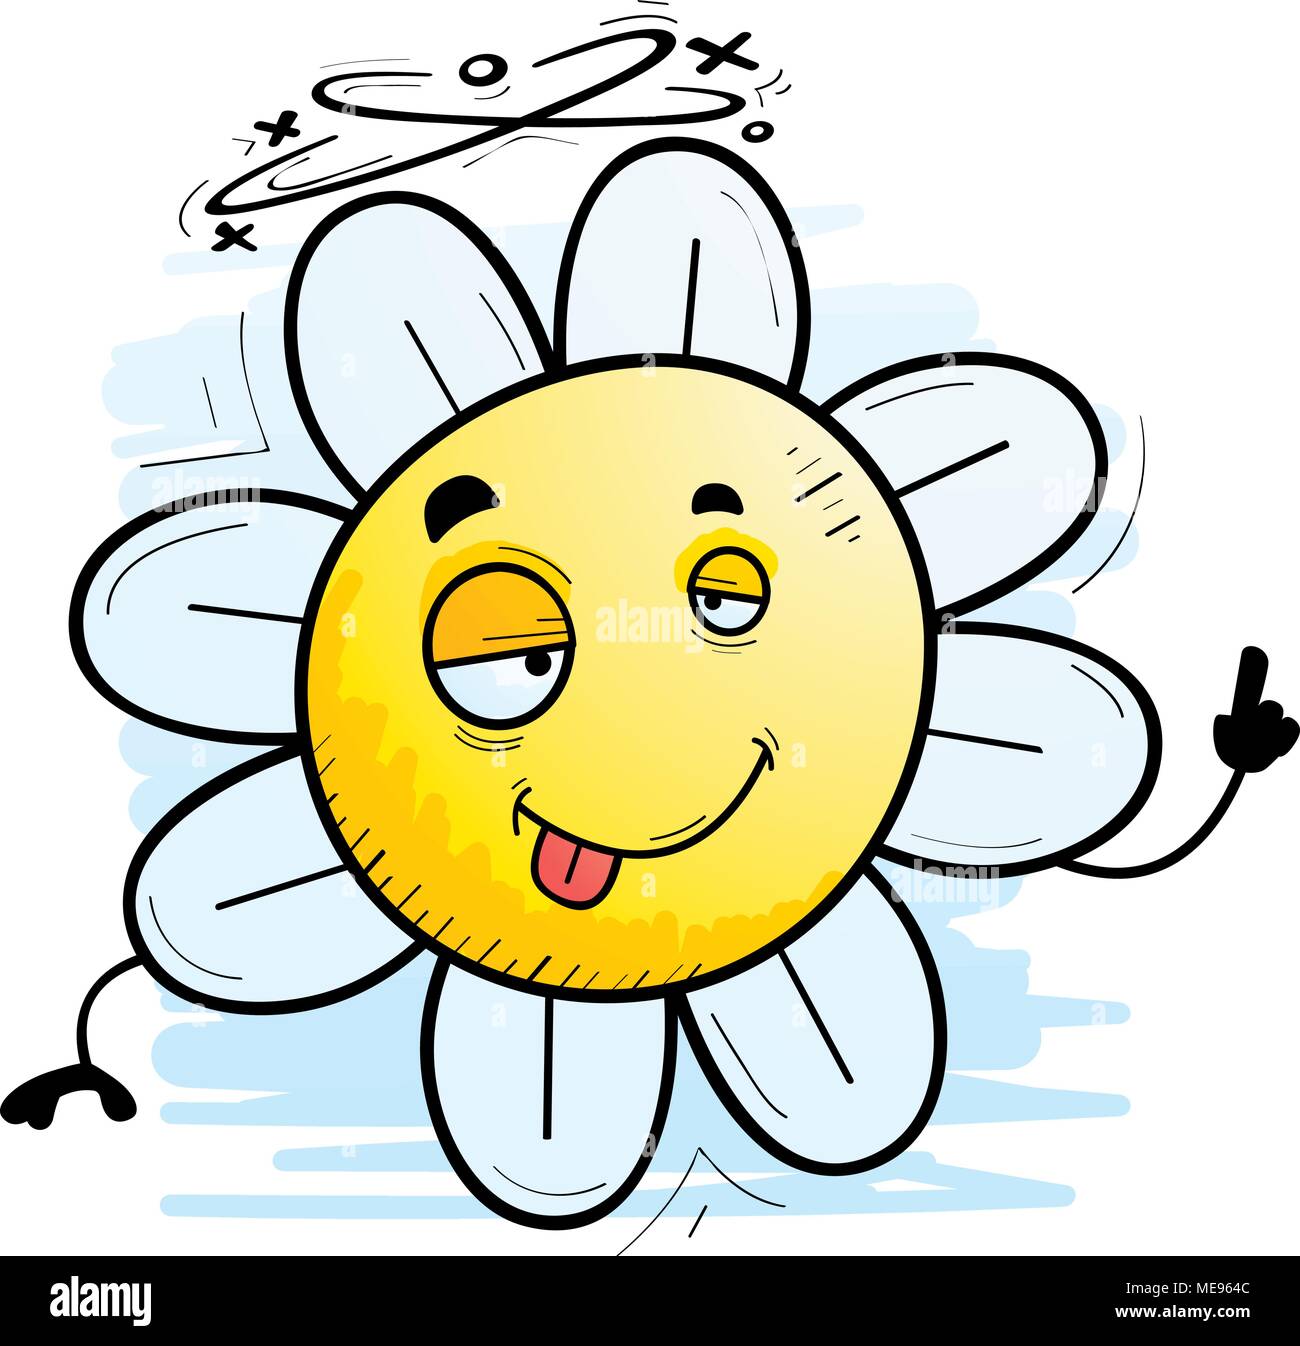 fear face expression clipart of flowers